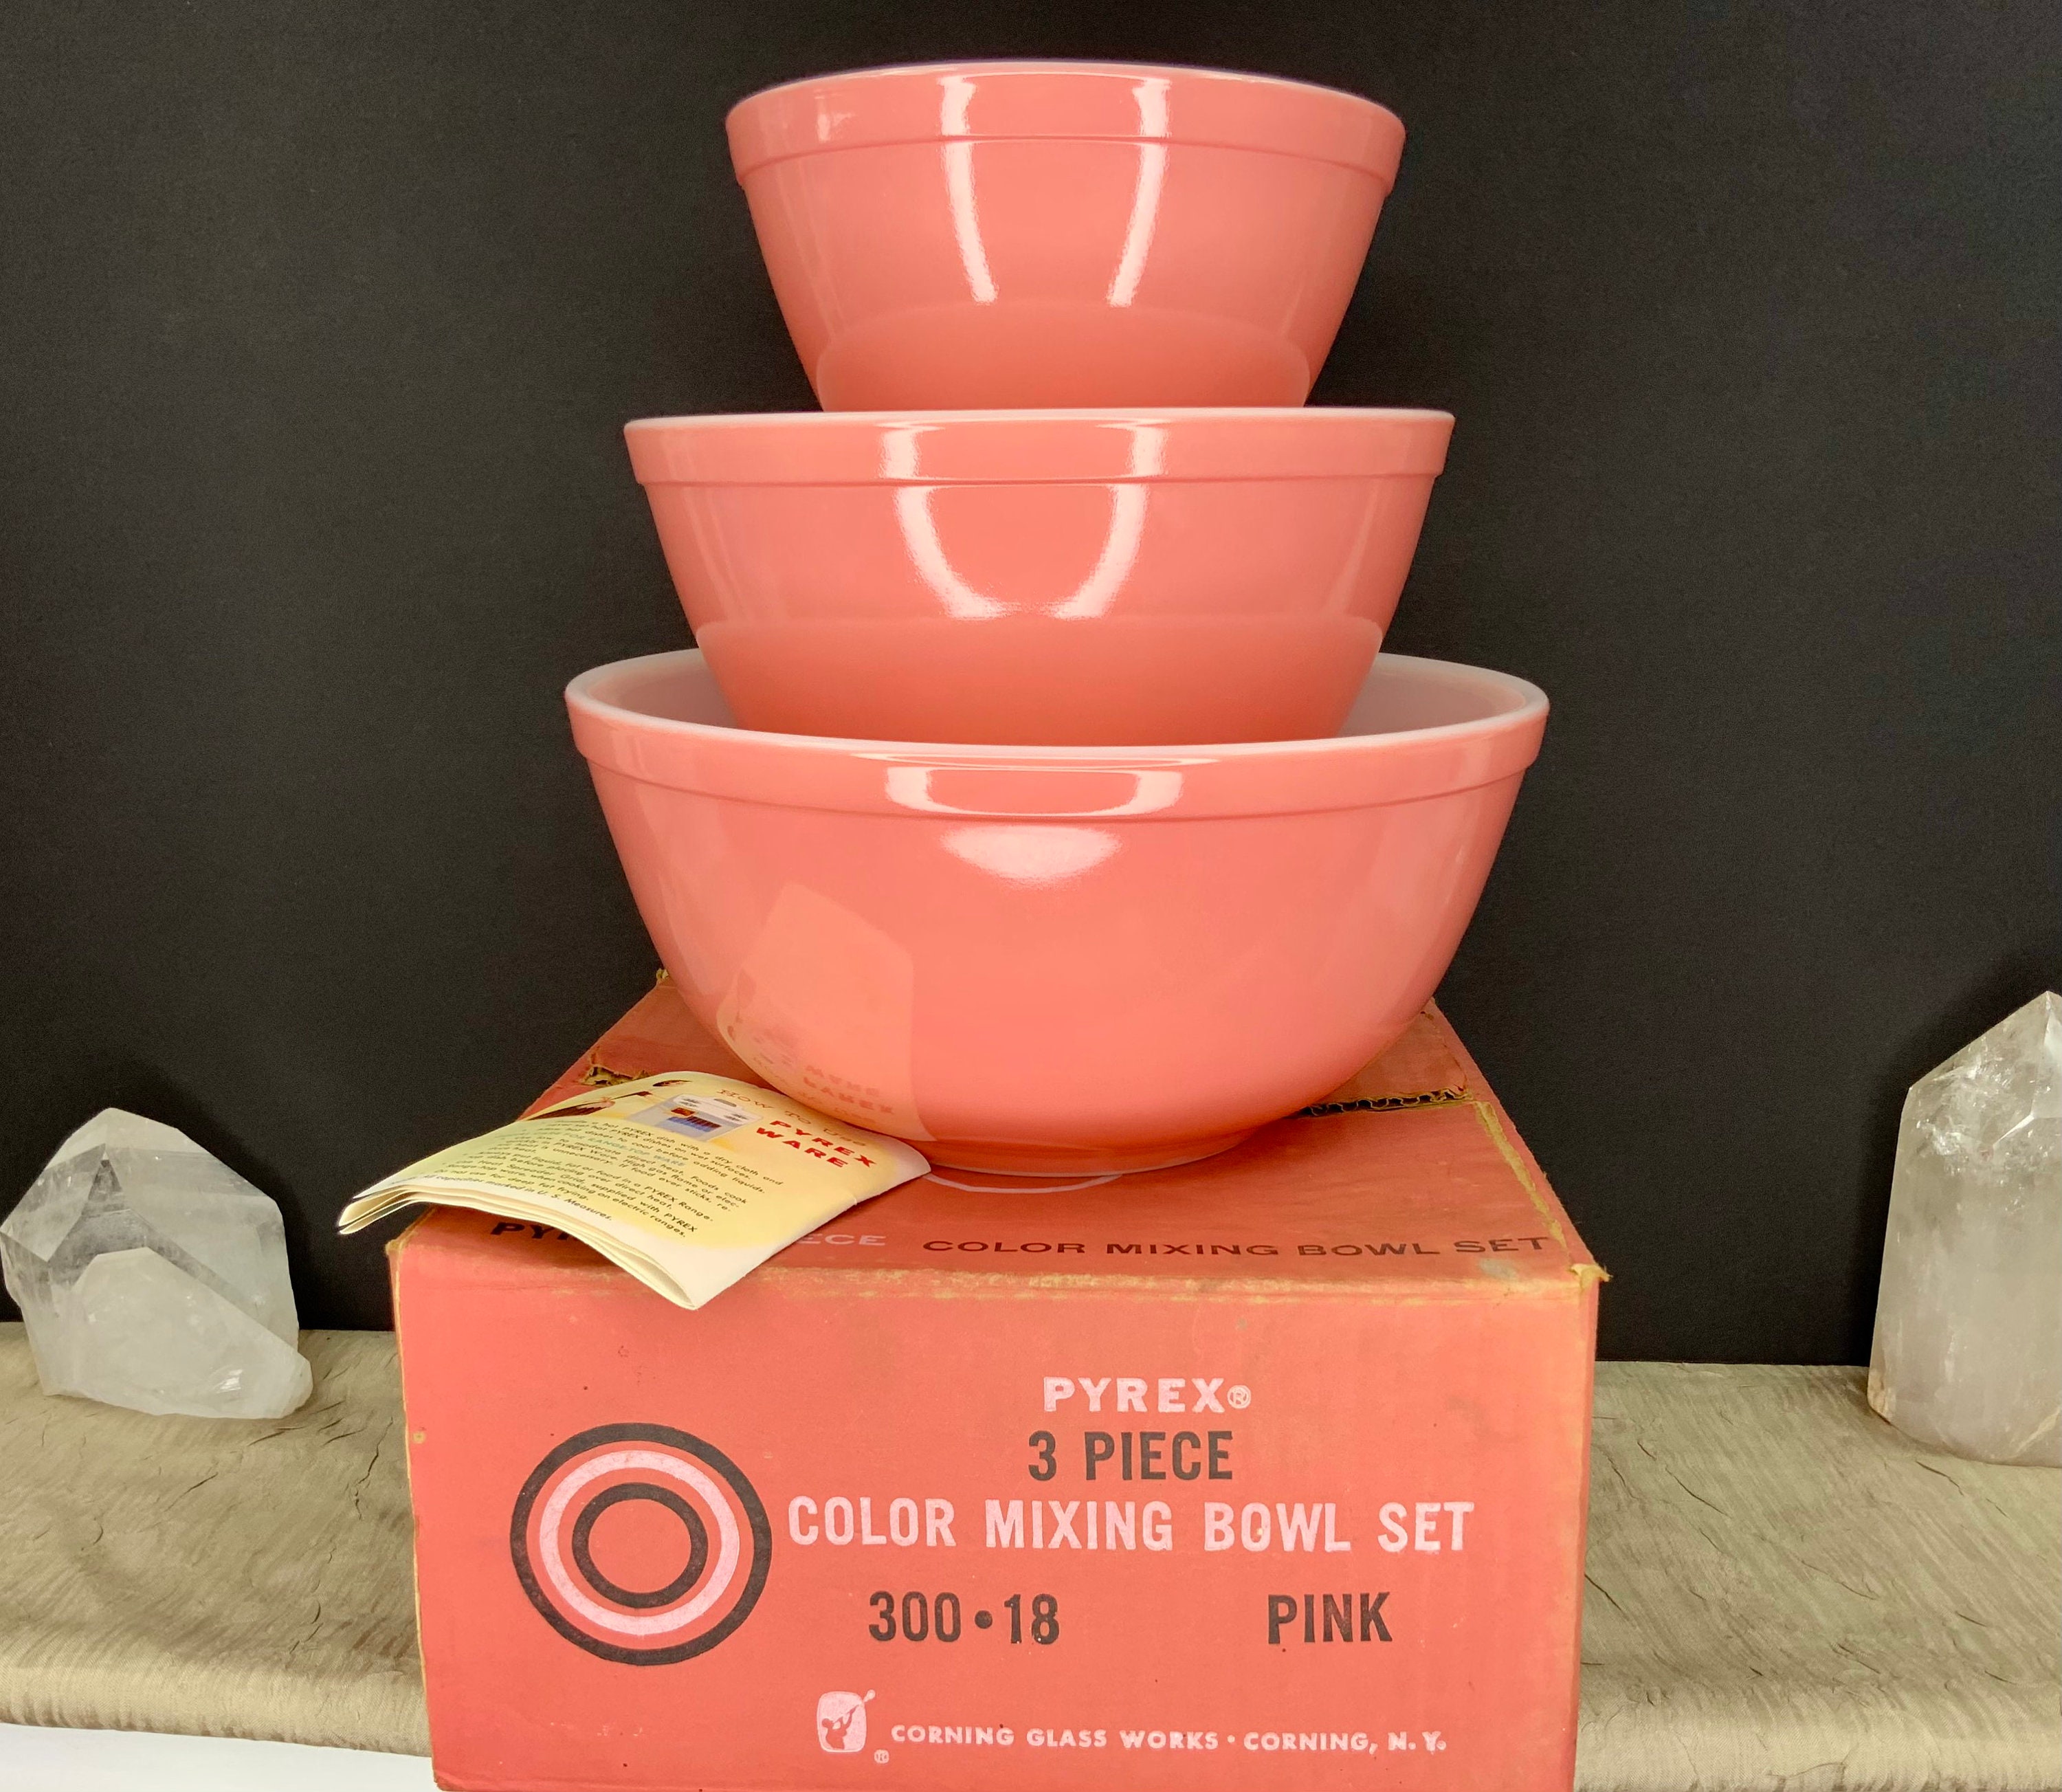 Vintage Pyrex Pink Mixing Bows, New in Box, Pink Nesting Bowls, Set of 3,  Original Box and Packing Material, Never Used Pyrex, Made in USA 